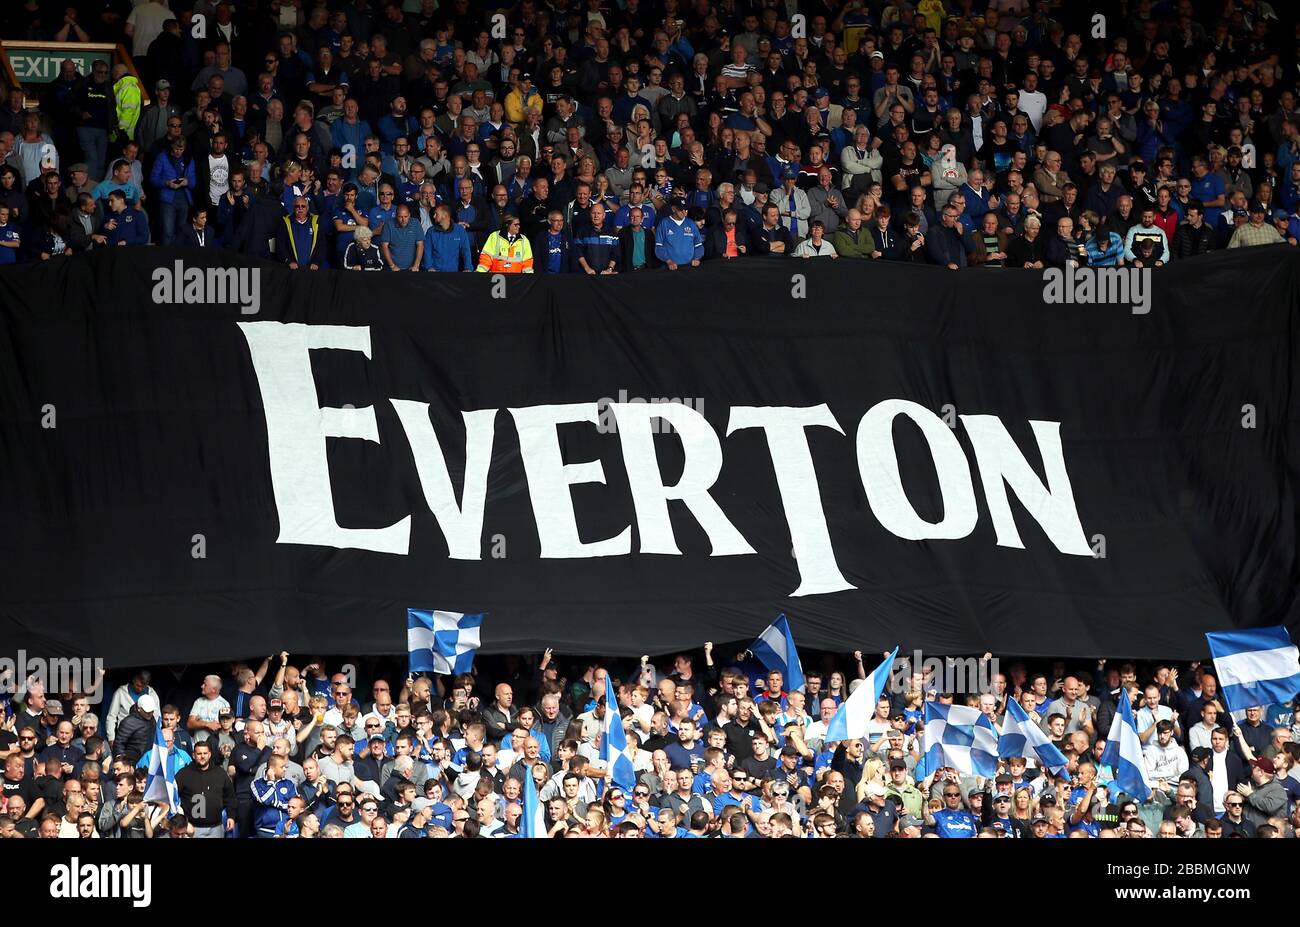 Everton fans with a large banner in the style of the Beatles font prior to kick-off Stock Photo